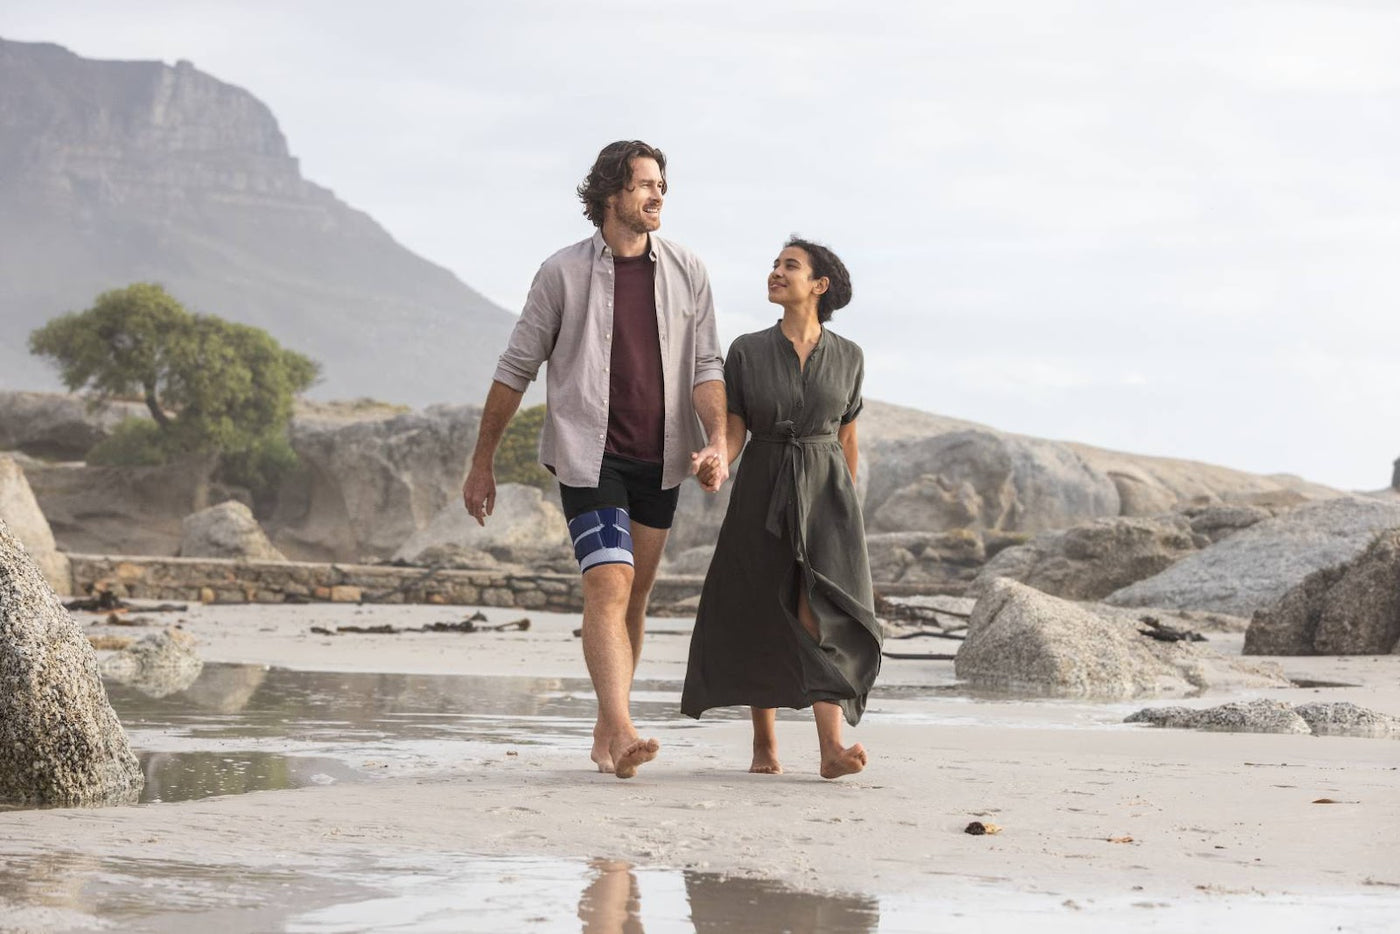 Man walking with his partner on the beach. He is wearing the MyoTrain Thigh Brace to manage thigh muscle pain